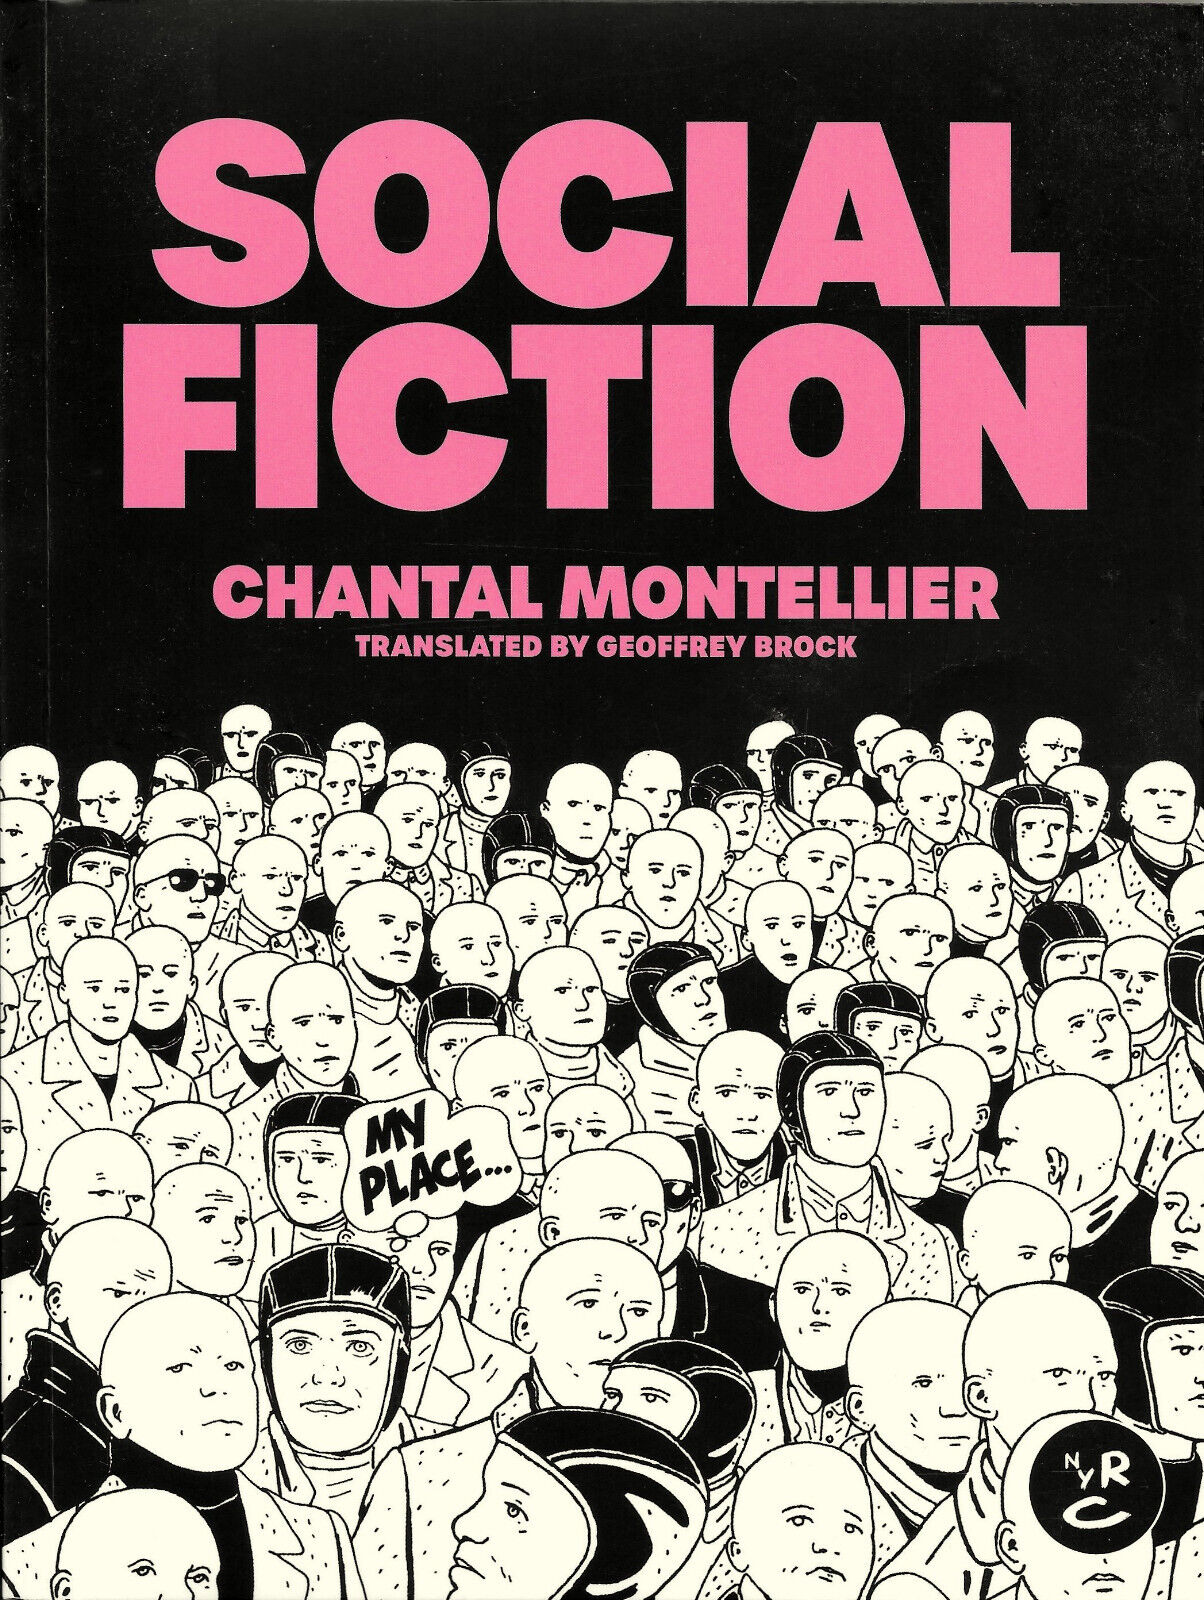 SOCIAL FICTION, 2023 graphic novel, Chantal Montellier, Geoffrey Brock 200 pages